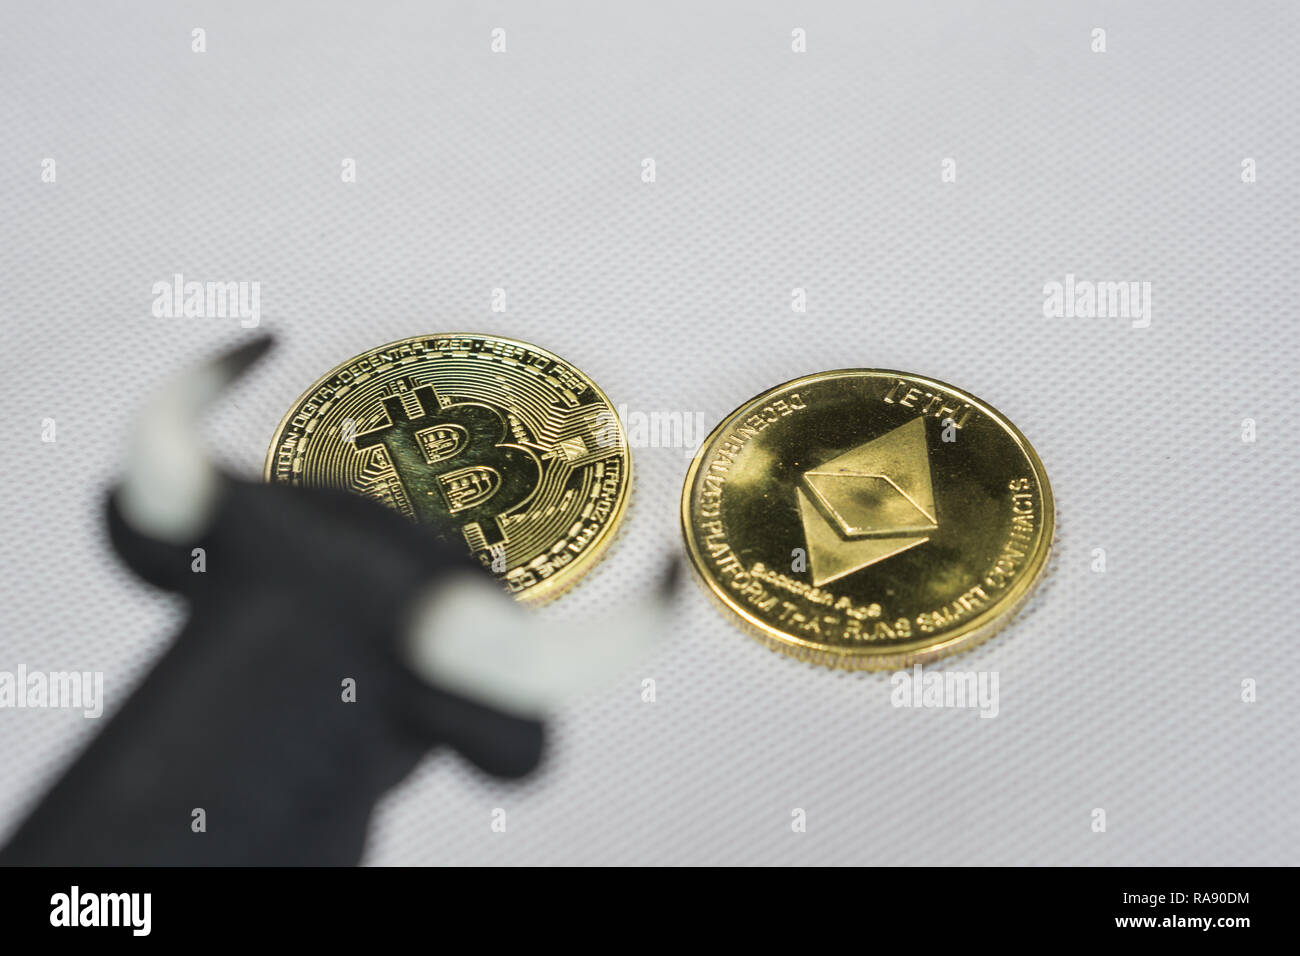 Bull market in crypto currency. Bull above Bitcoin and Ethereum coin Stock Photo